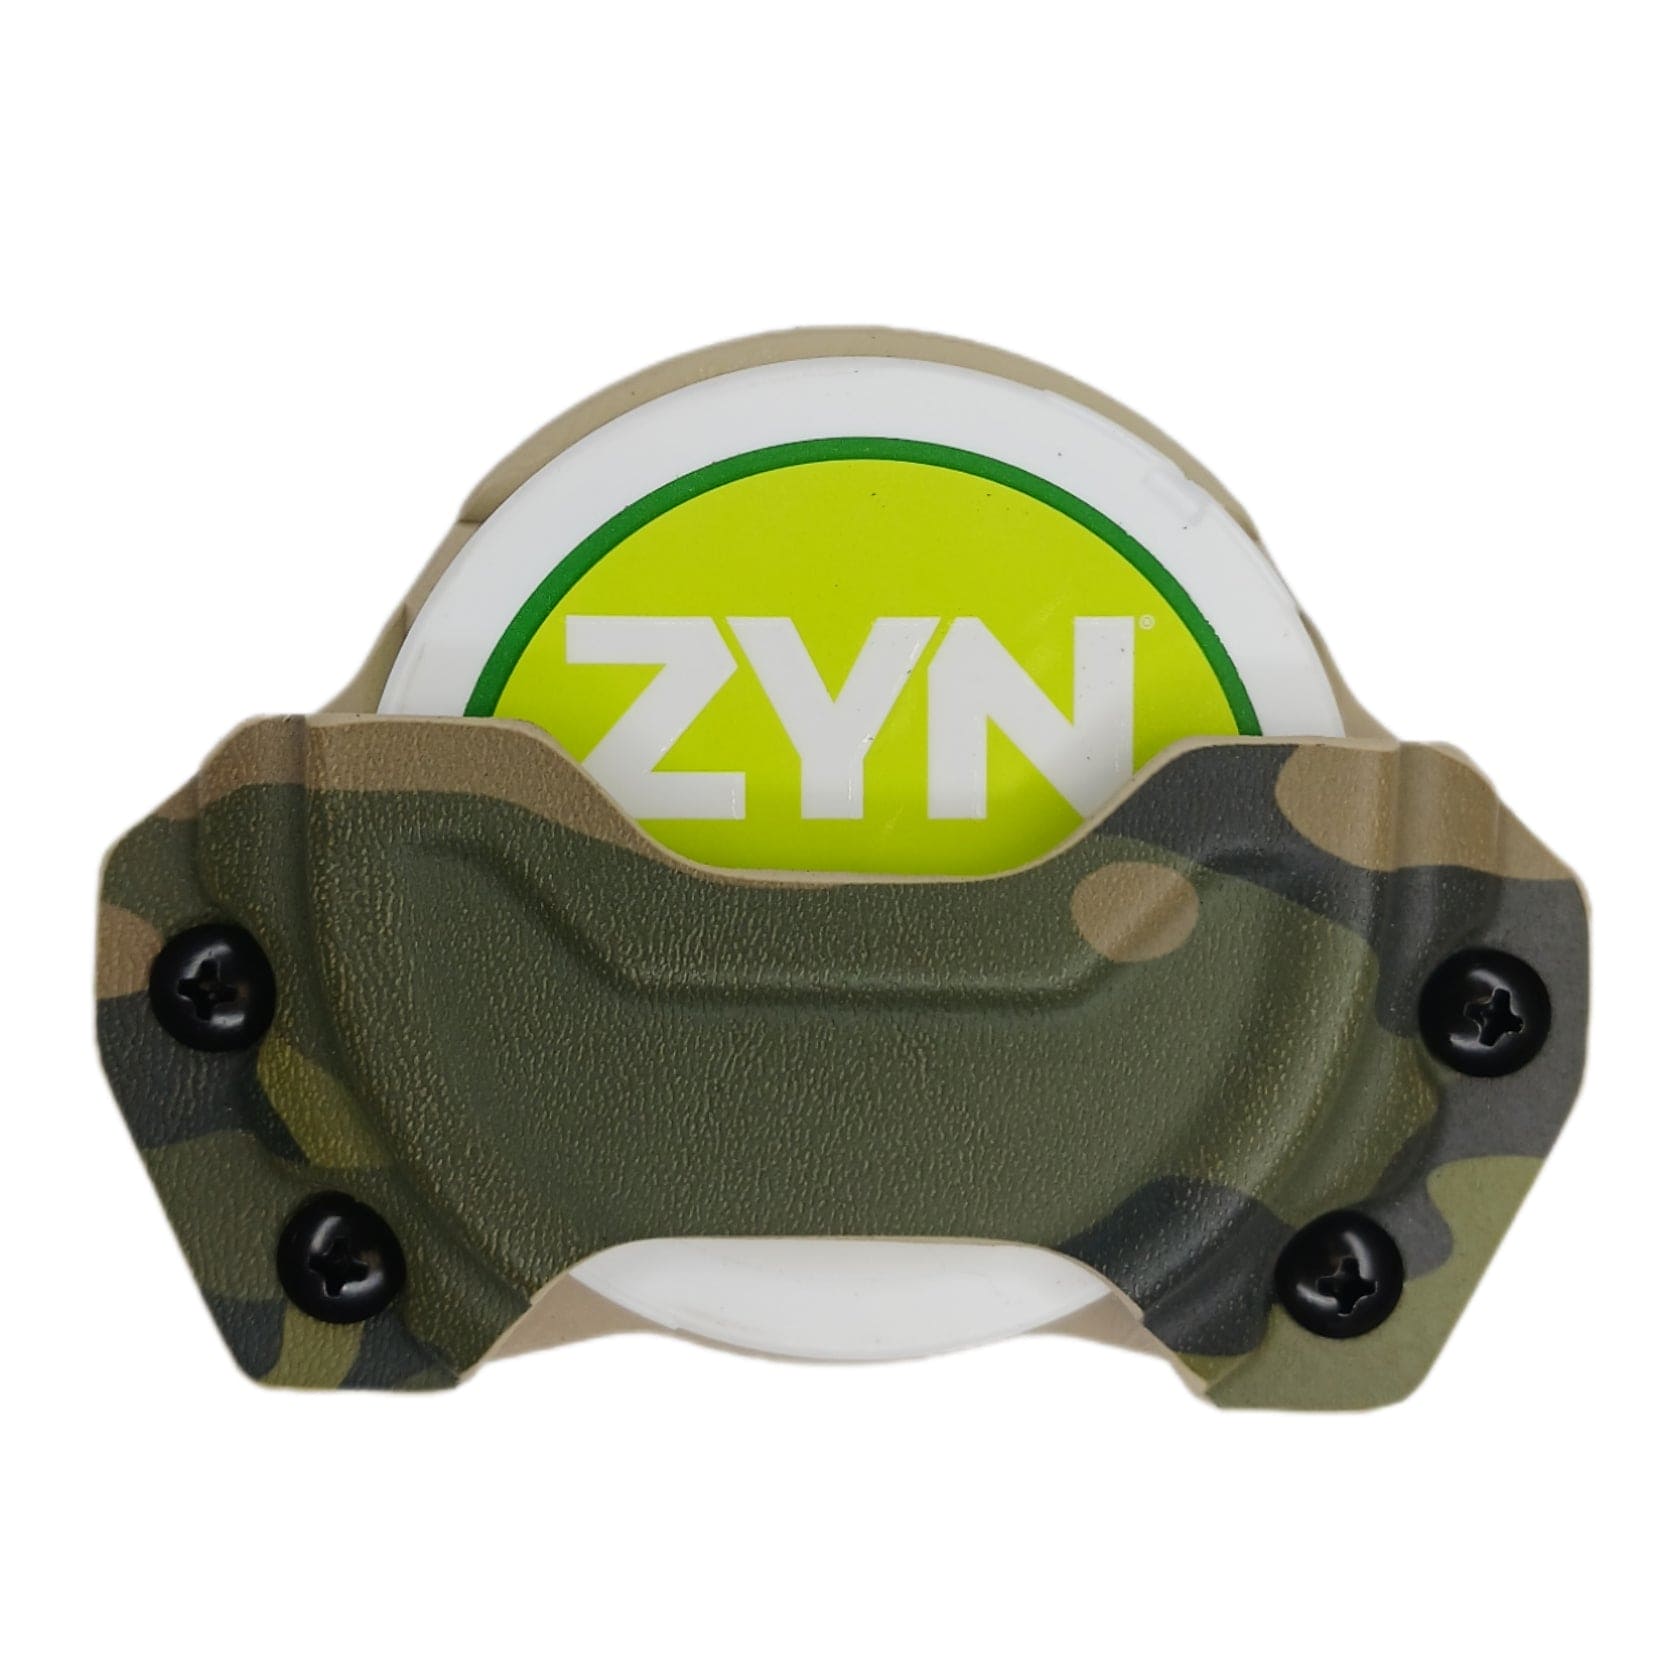 Zyn can holster/pouch. (colors and customization available)